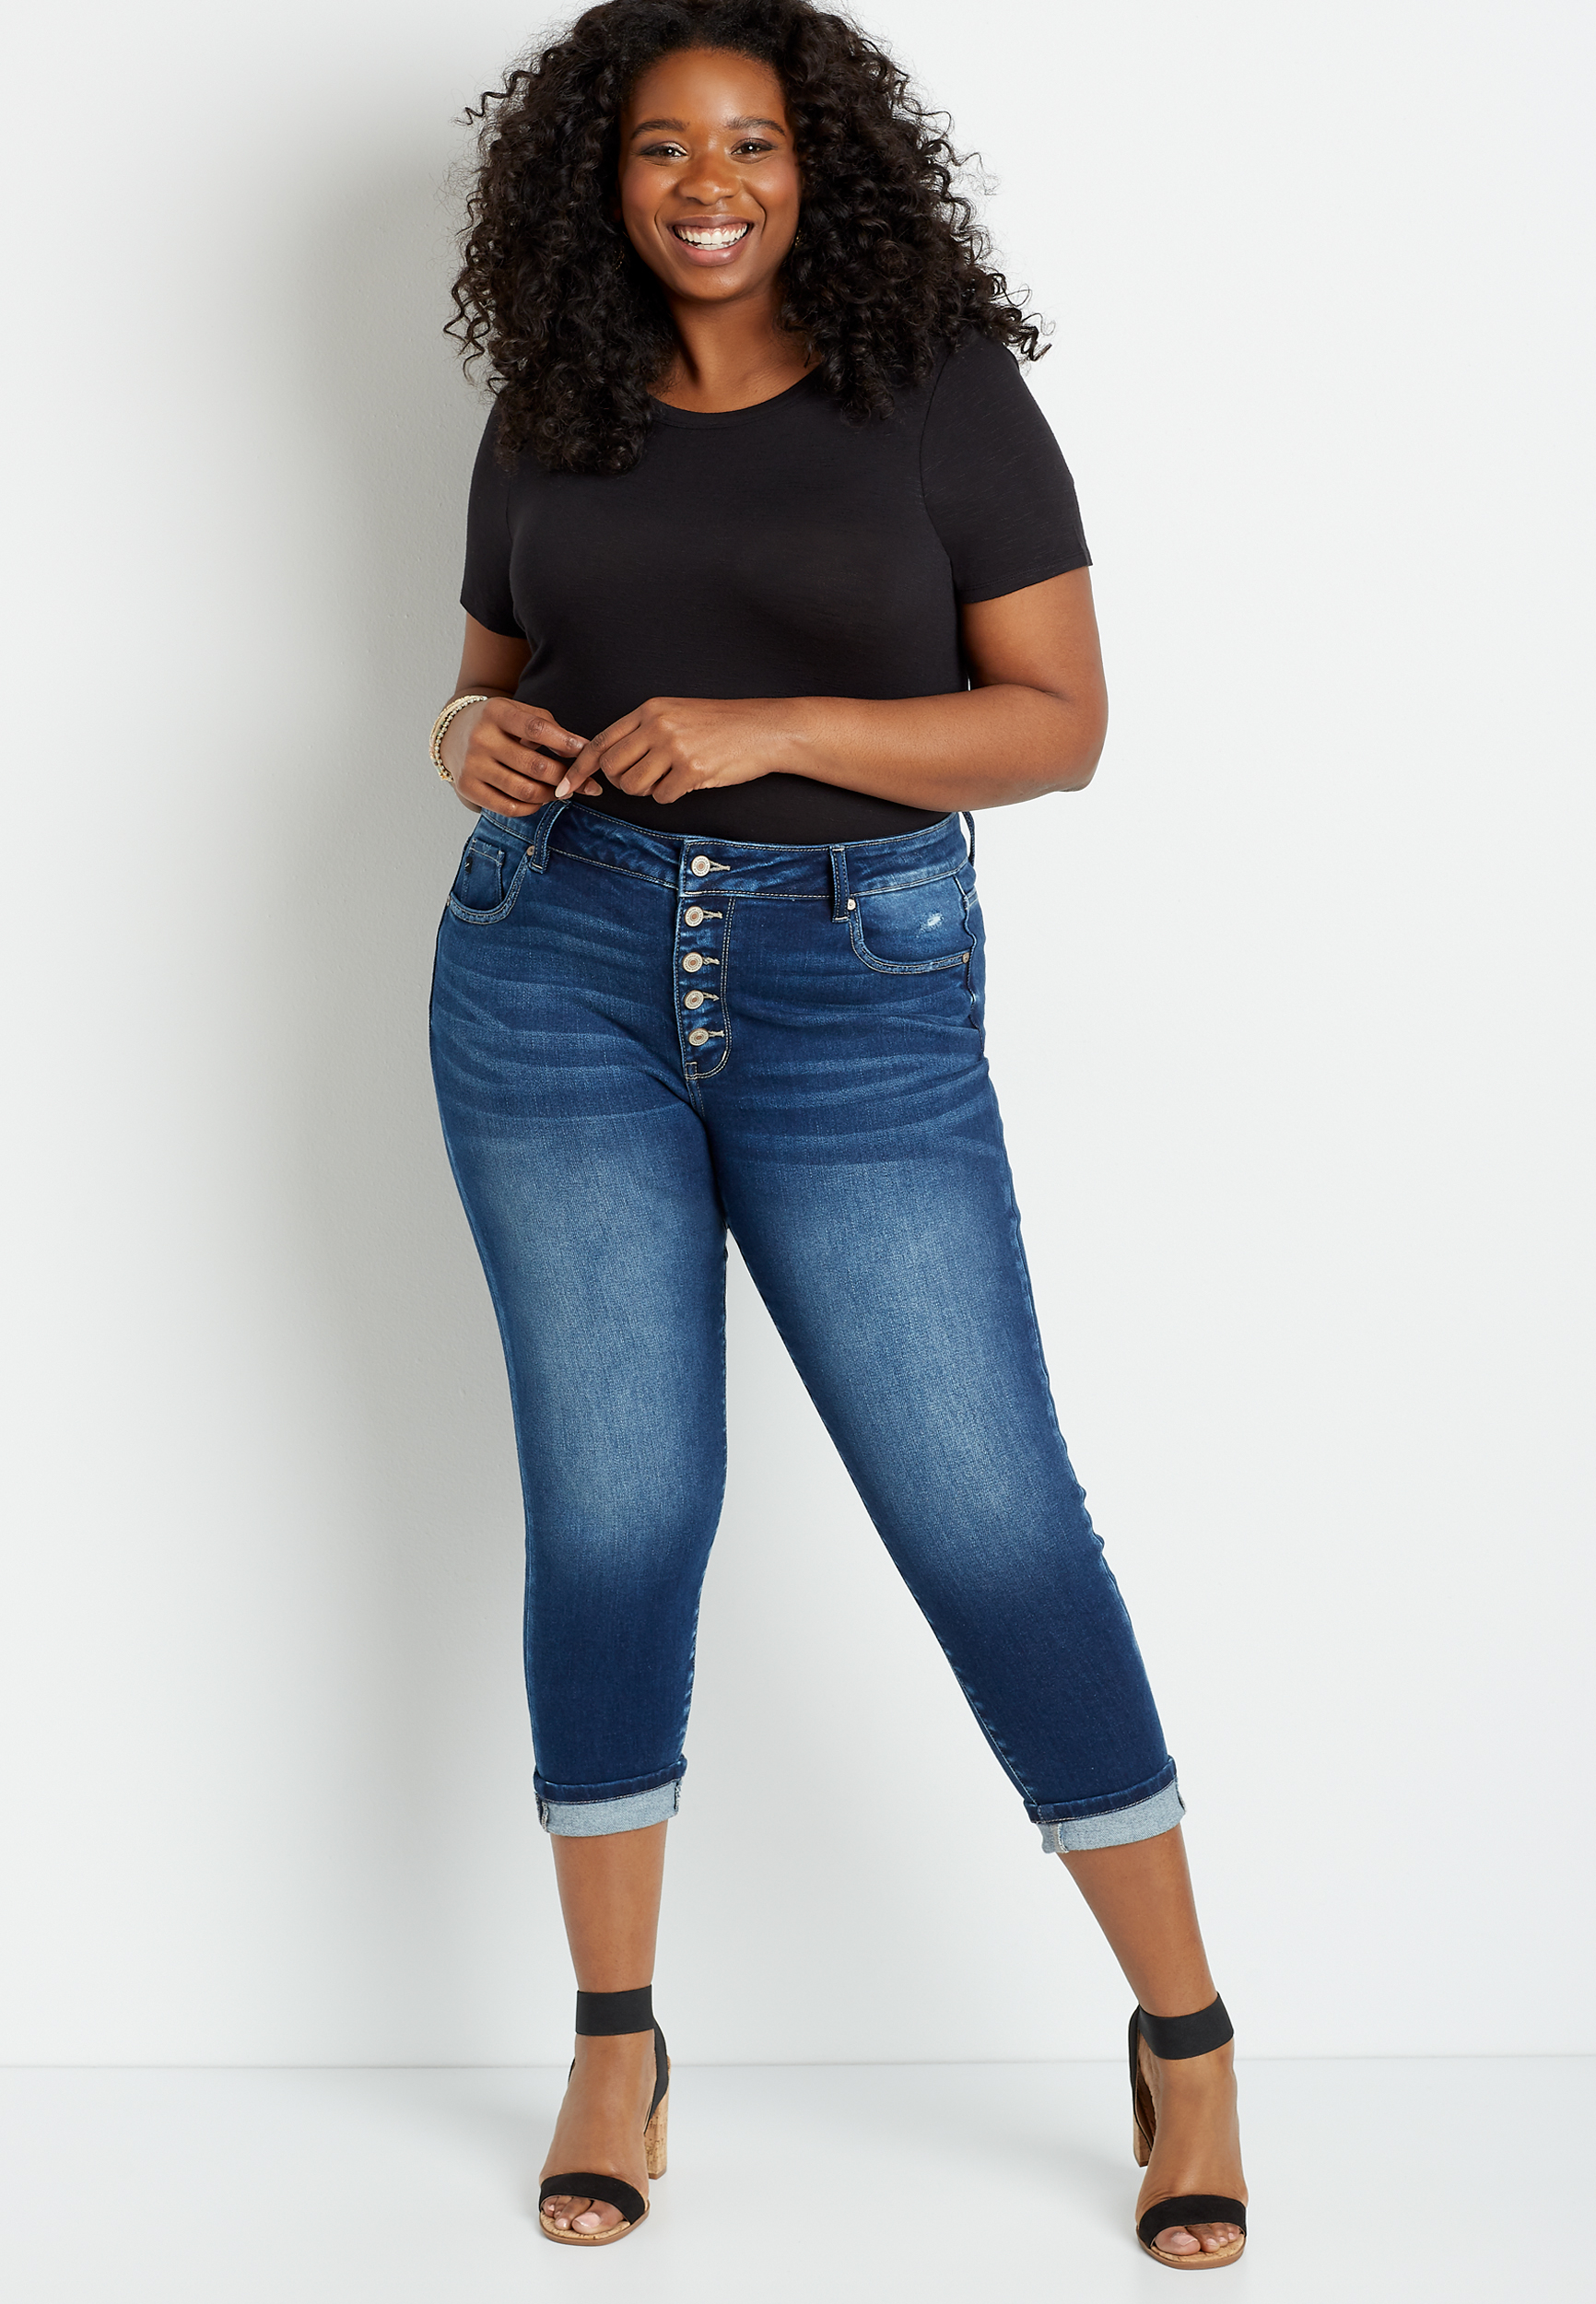 Plus Size KanCan™ High Rise Dark Button Fly Cropped Jean | maurices